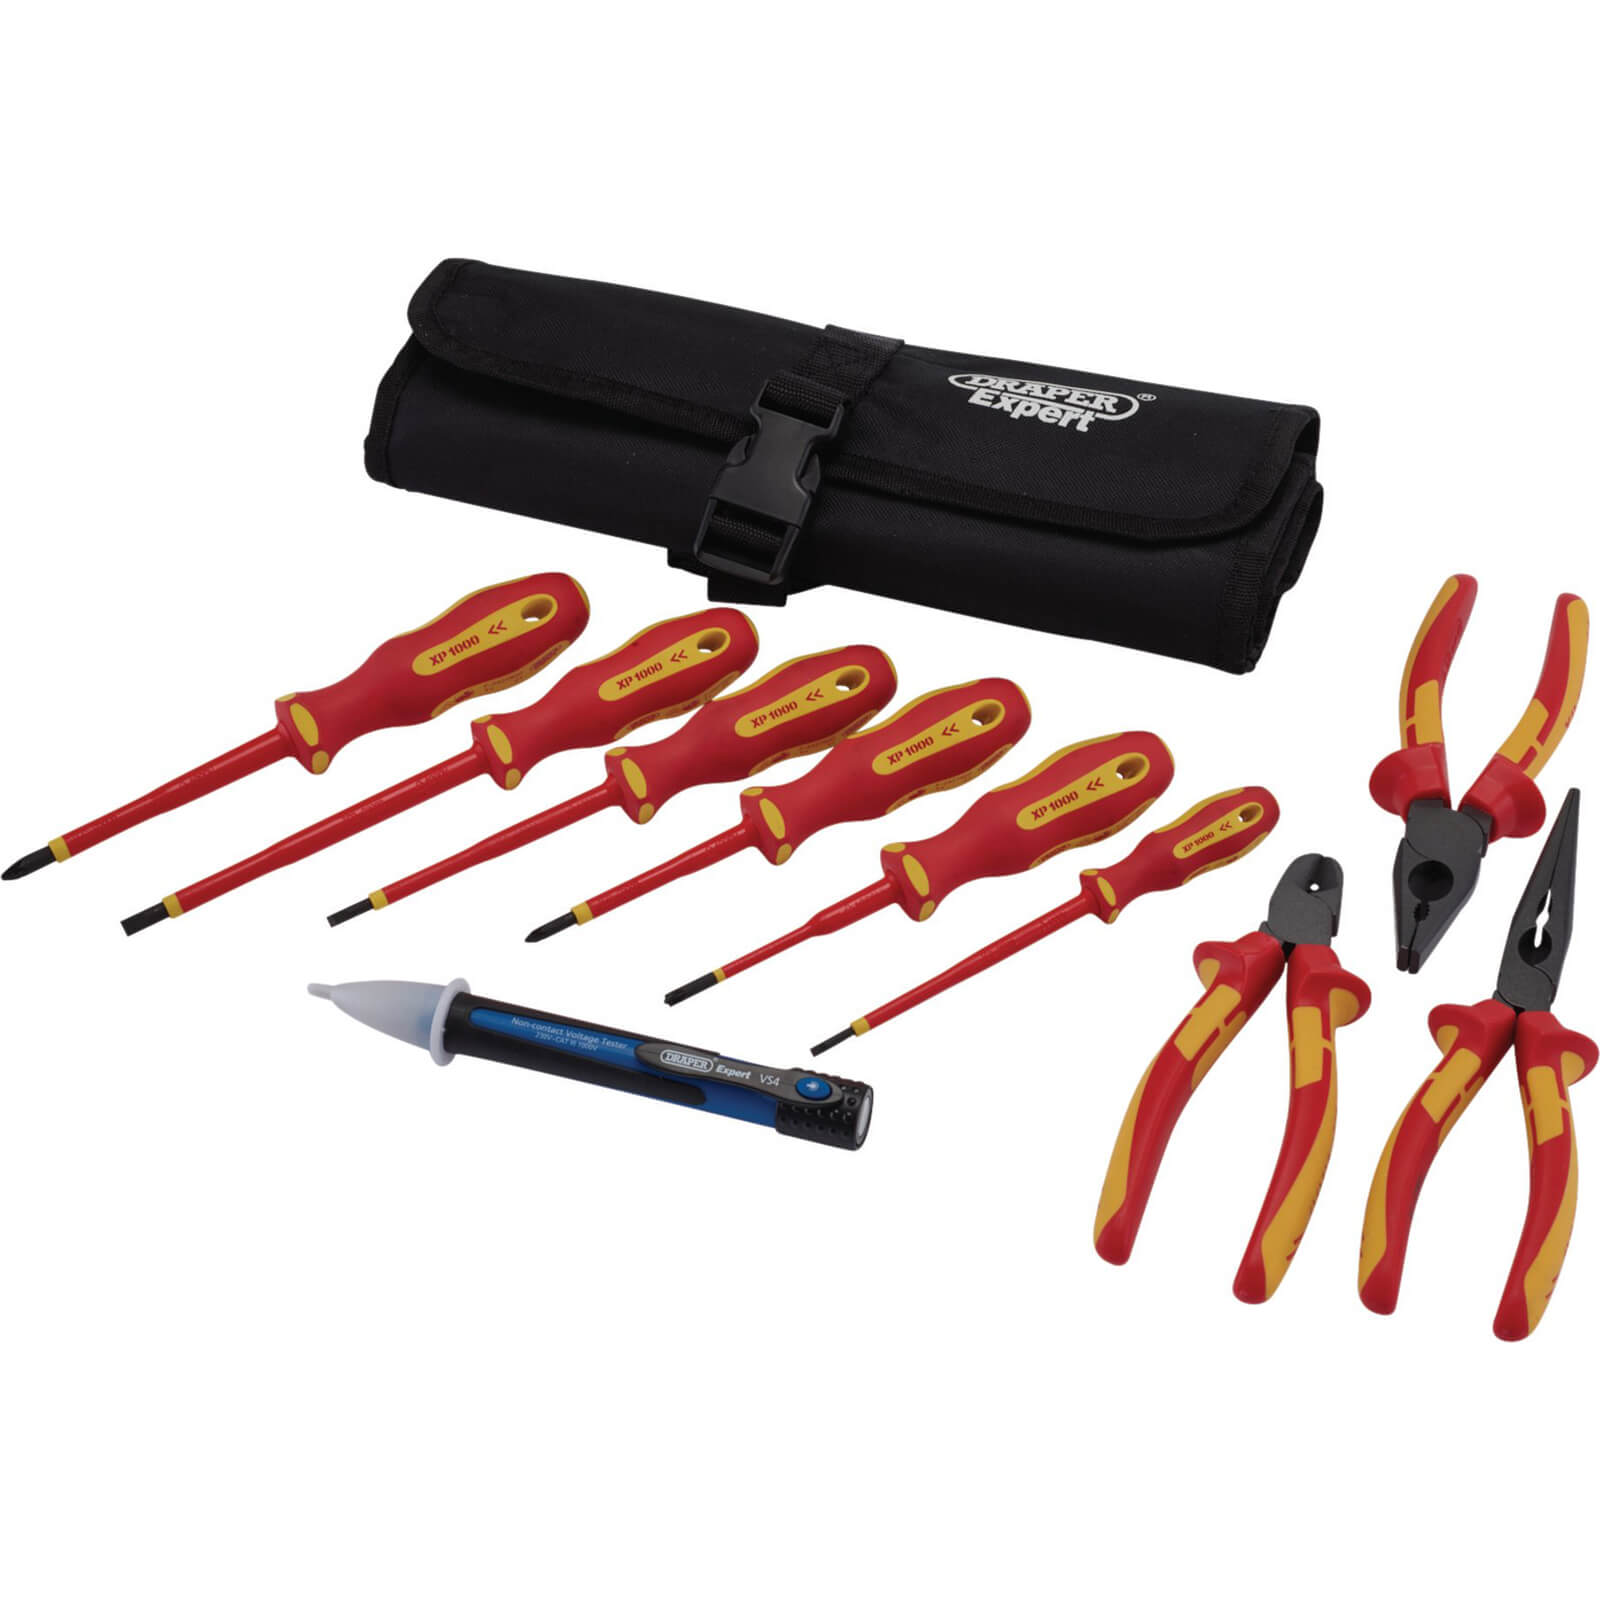 Image of Draper 10 Piece XP1000 VDE Insulated Electrical Tool Kit